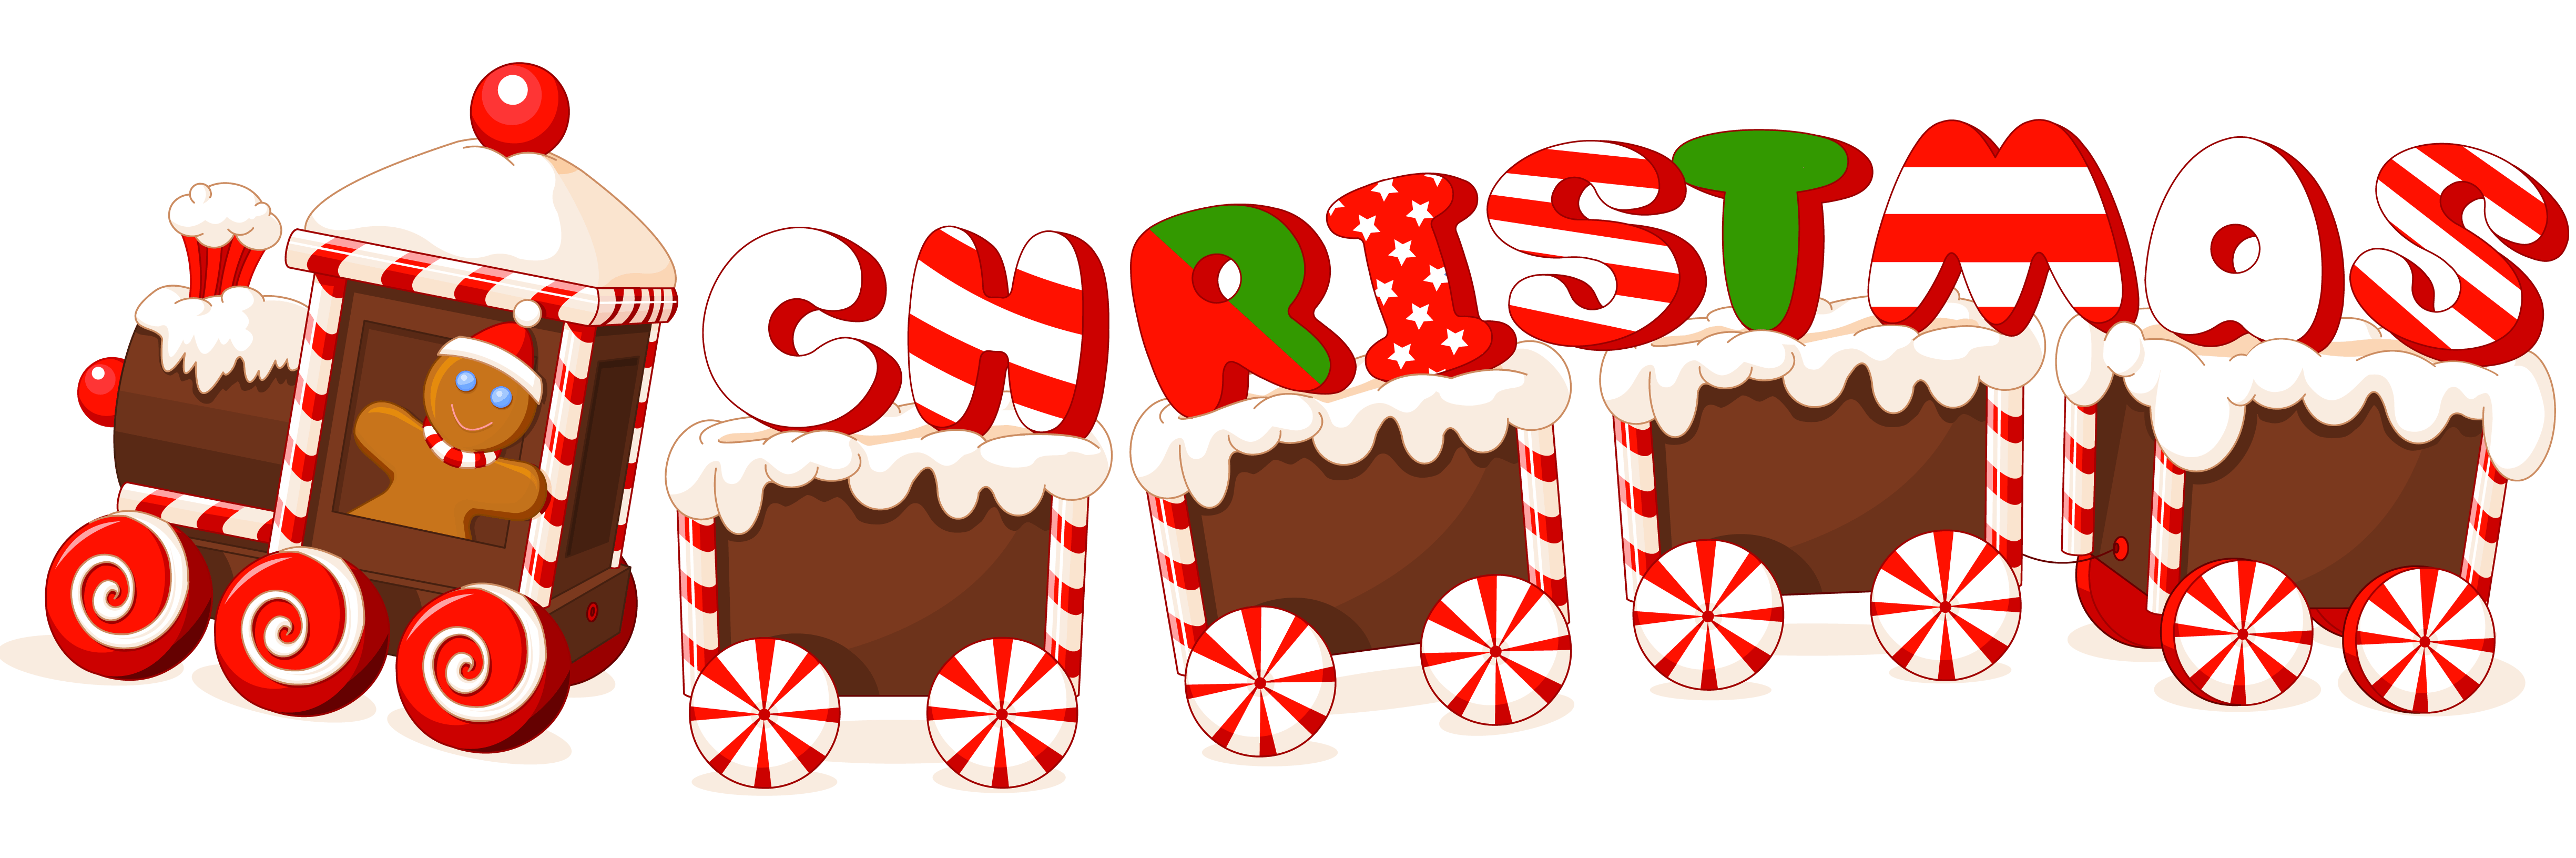 Gingerbread clipart baking. Merry christmas png brokers